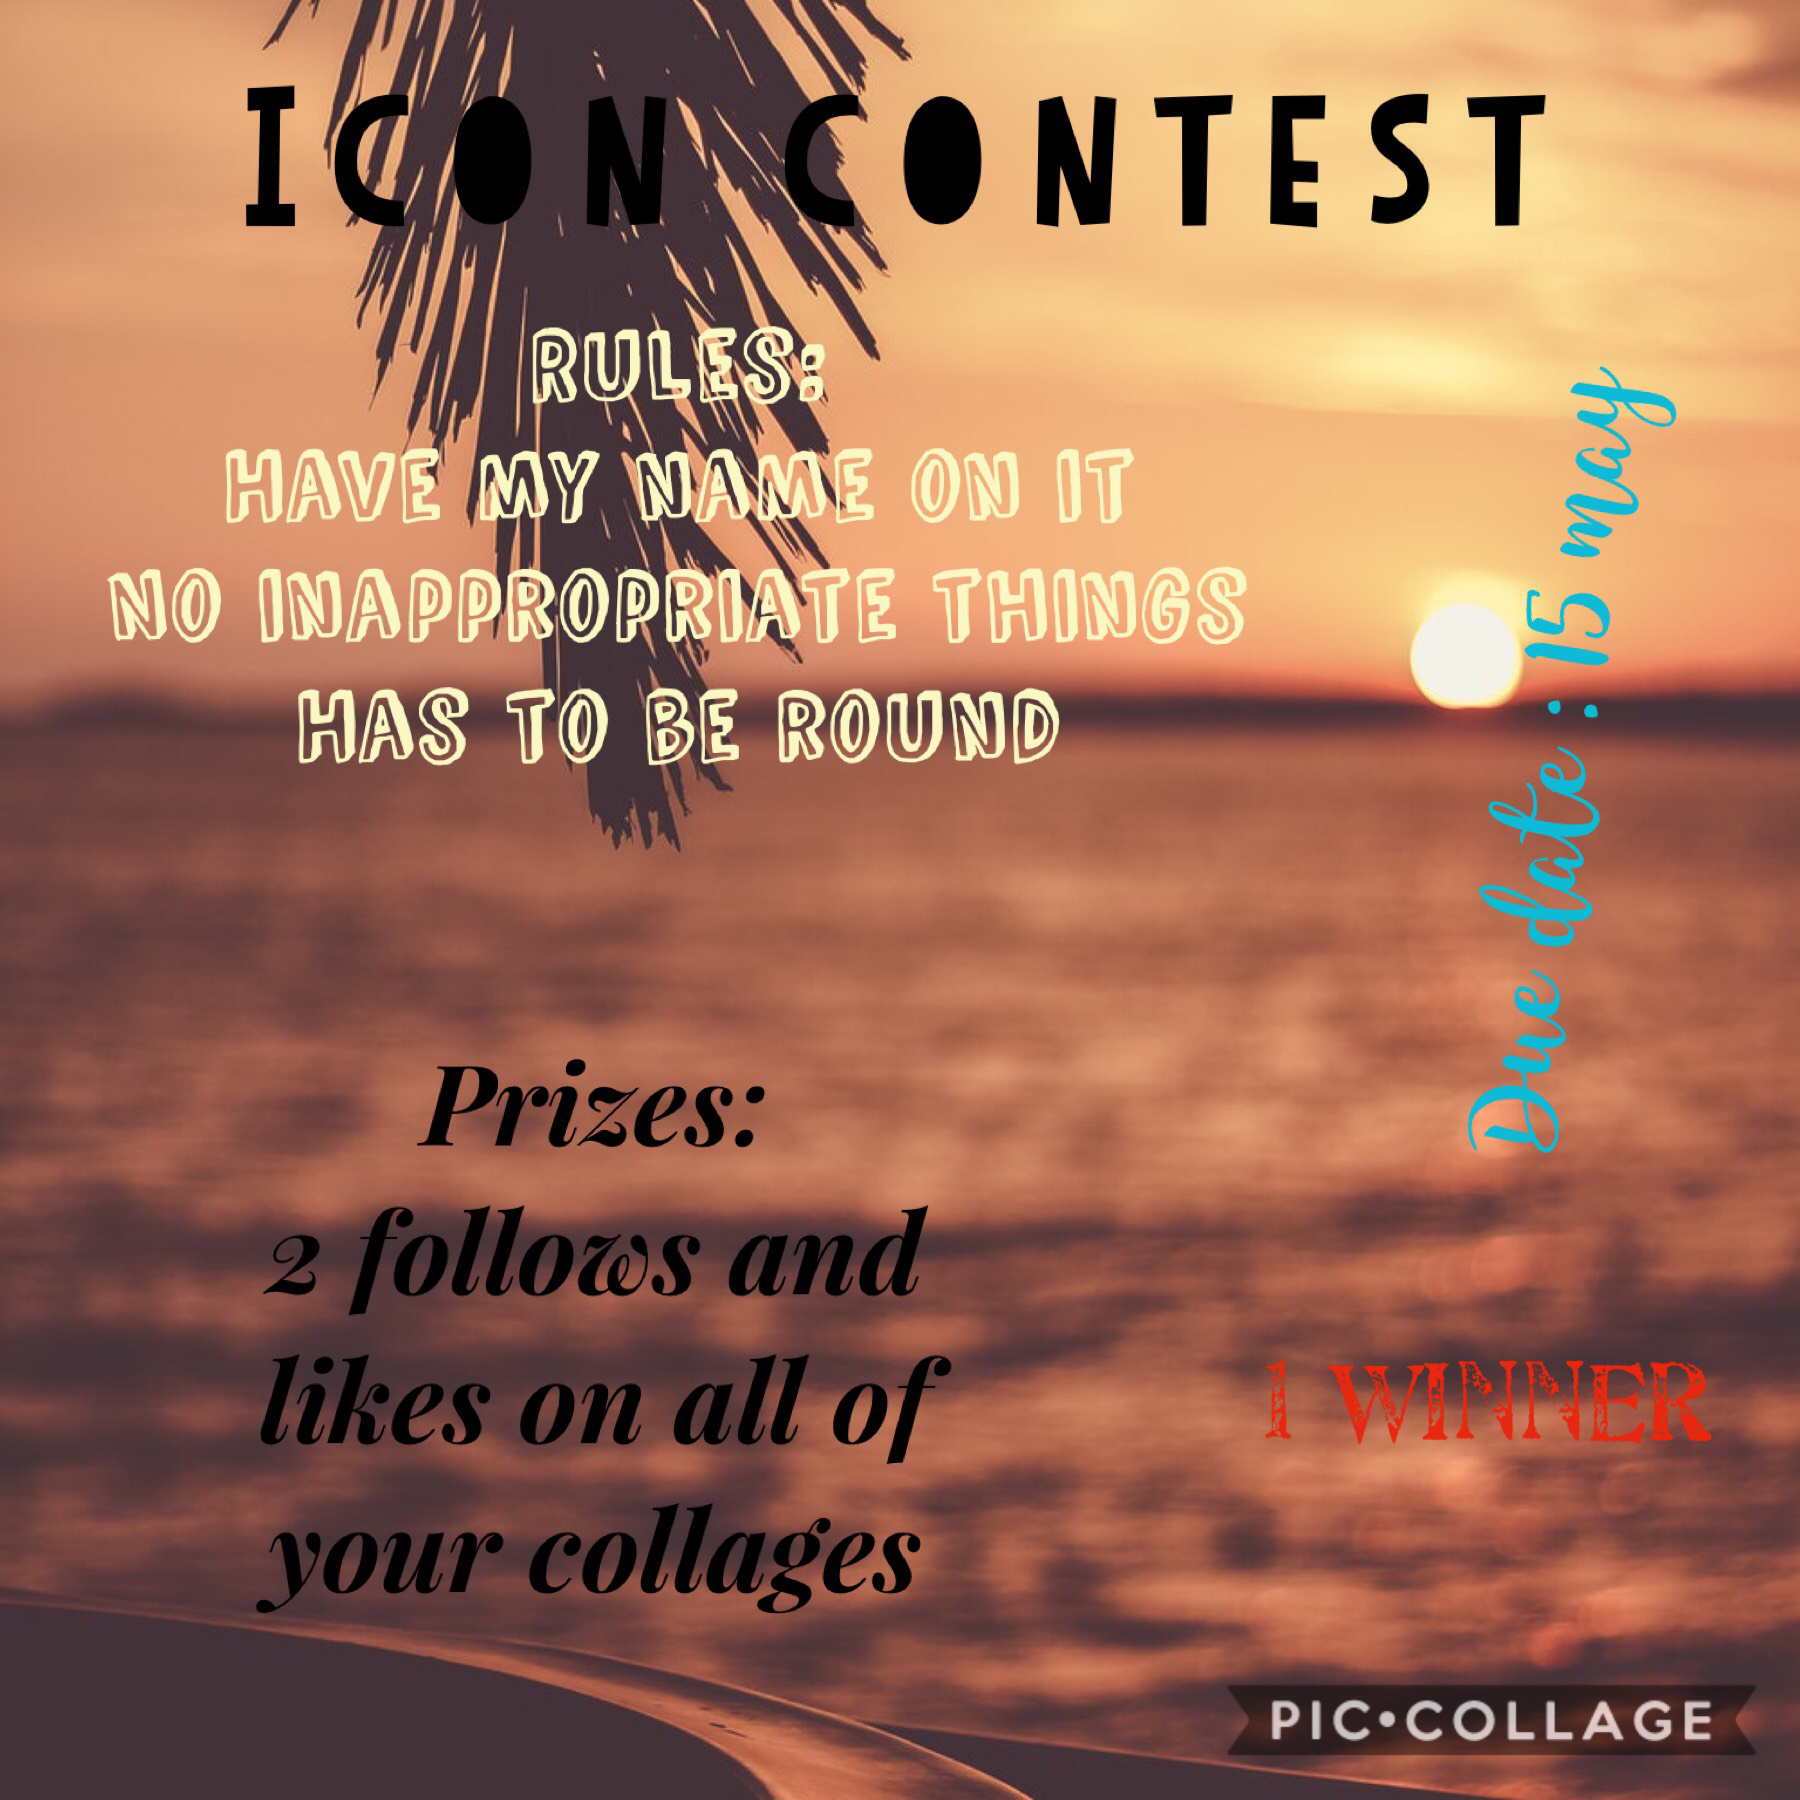 Please participate in this contest. I am desperate to get an 
Icon